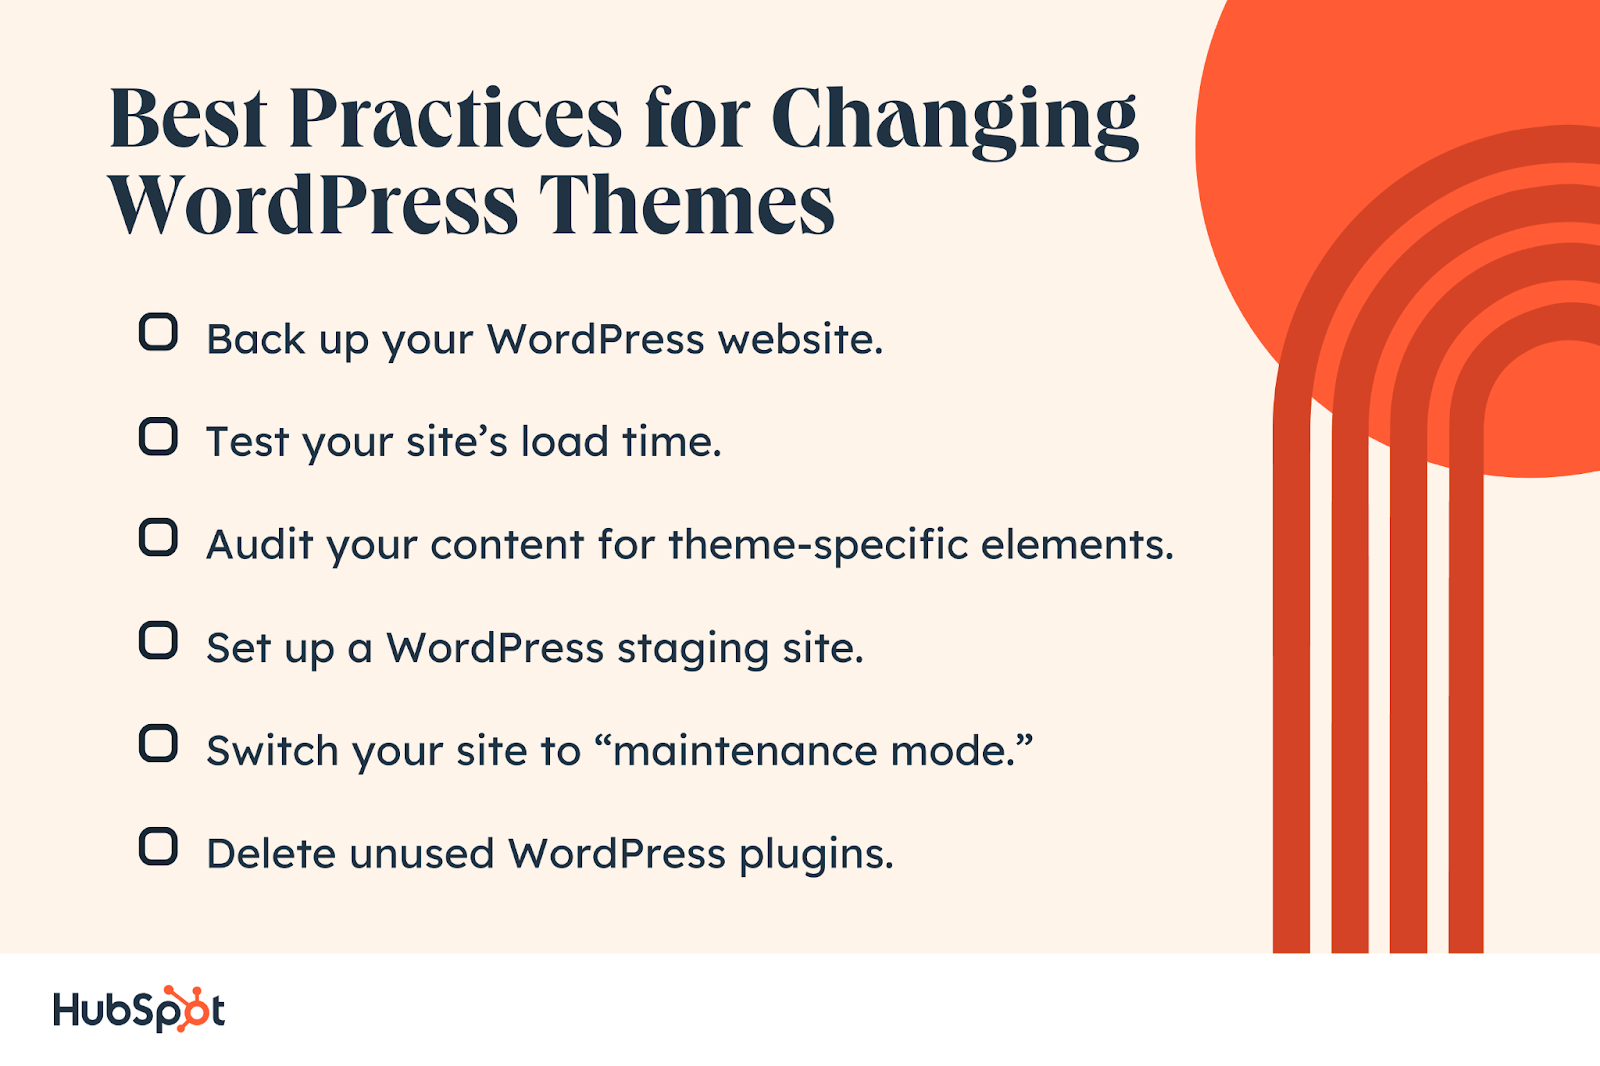 Best Practices for Changing WordPress Themes. Back up your WordPress website. Test your site’s load time. Audit your content for theme-specific elements. Set up a WordPress staging site. Switch your site to “maintenance mode.” Delete unused WordPress plugins.